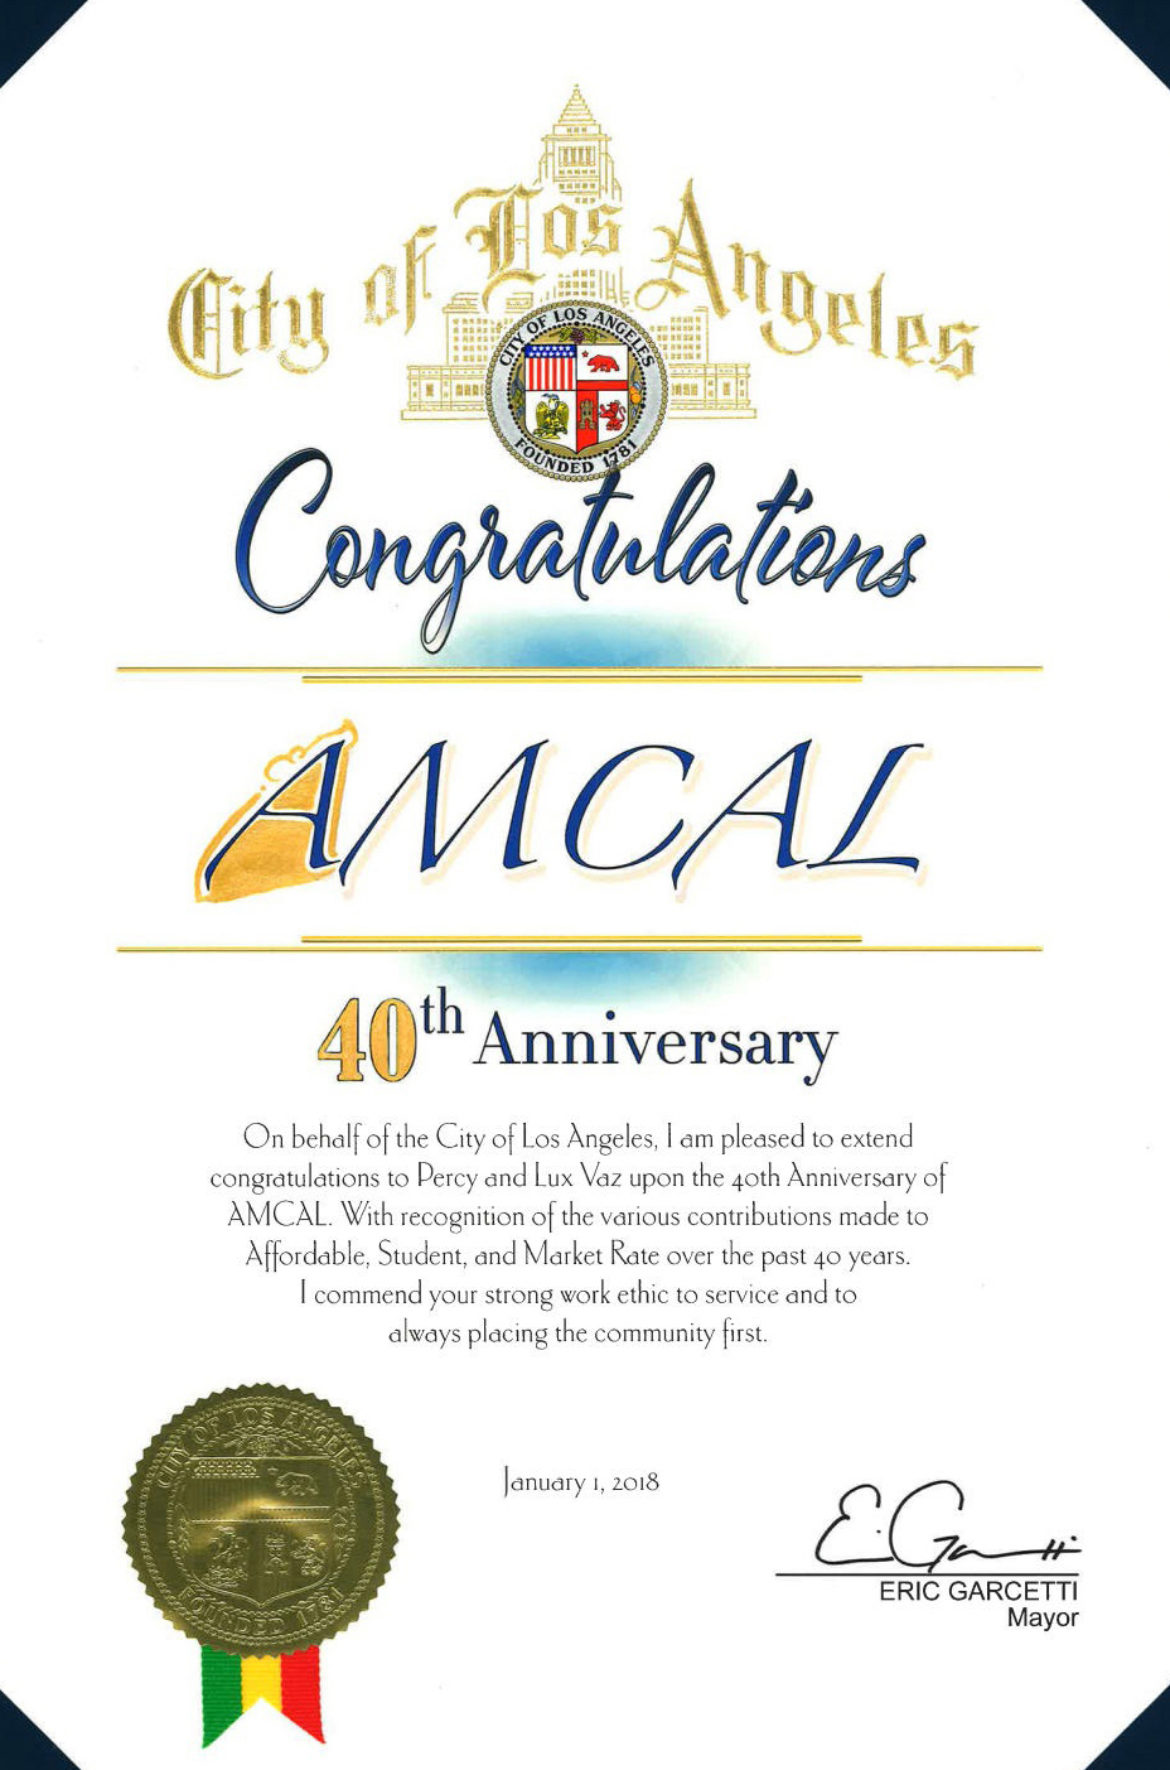 Photo of the City of Los Angeles Commendation to AMCAL on the company's 40th anniversary in 2018